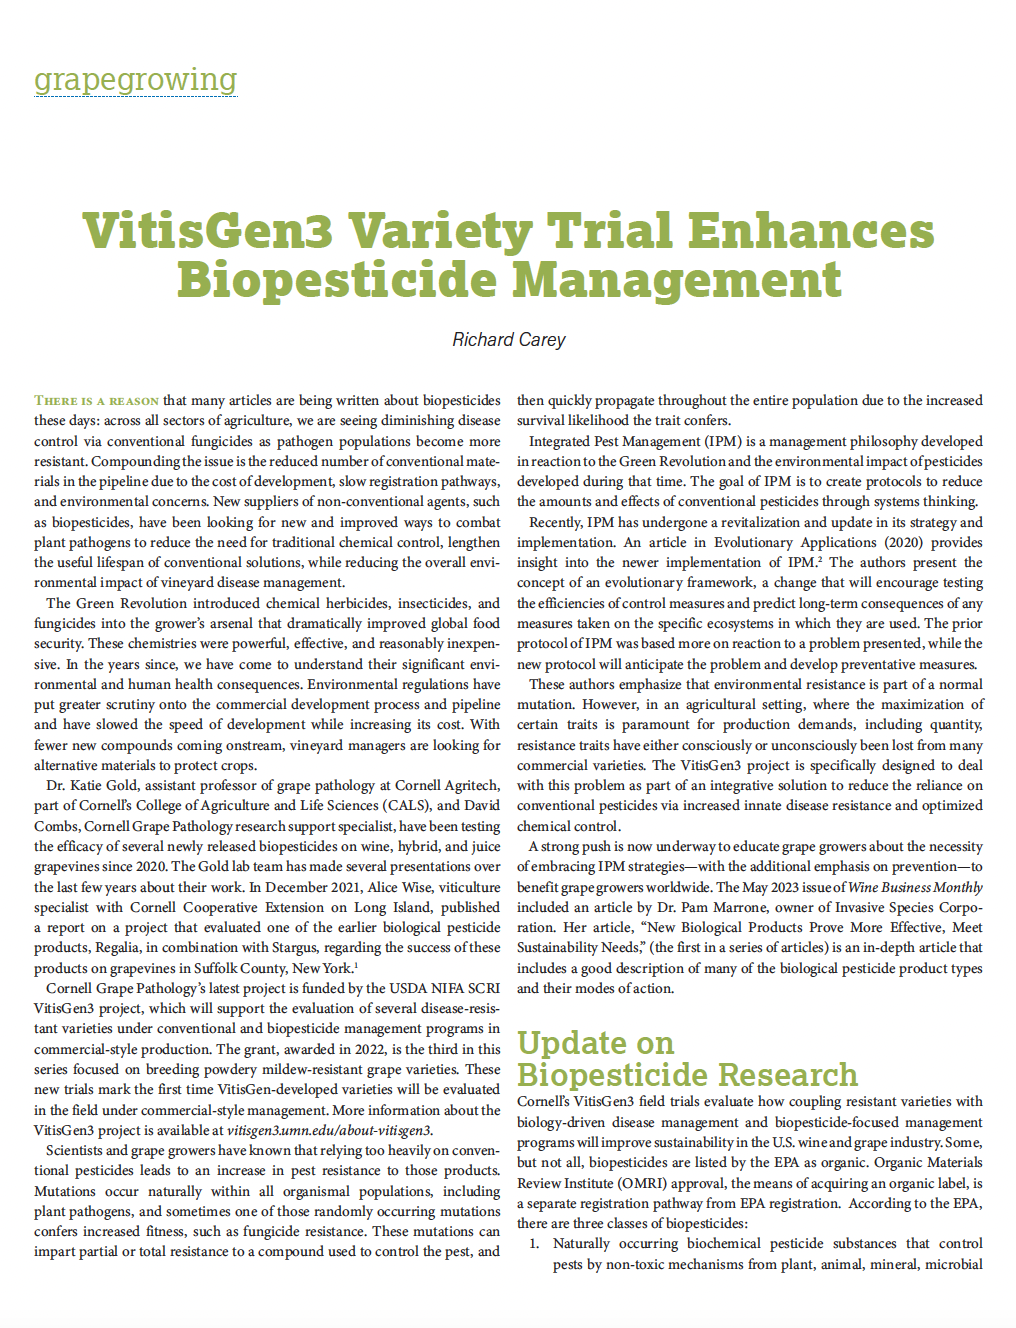 Image of the front page of the Wine Business Monthly VG3 Biopesticide article